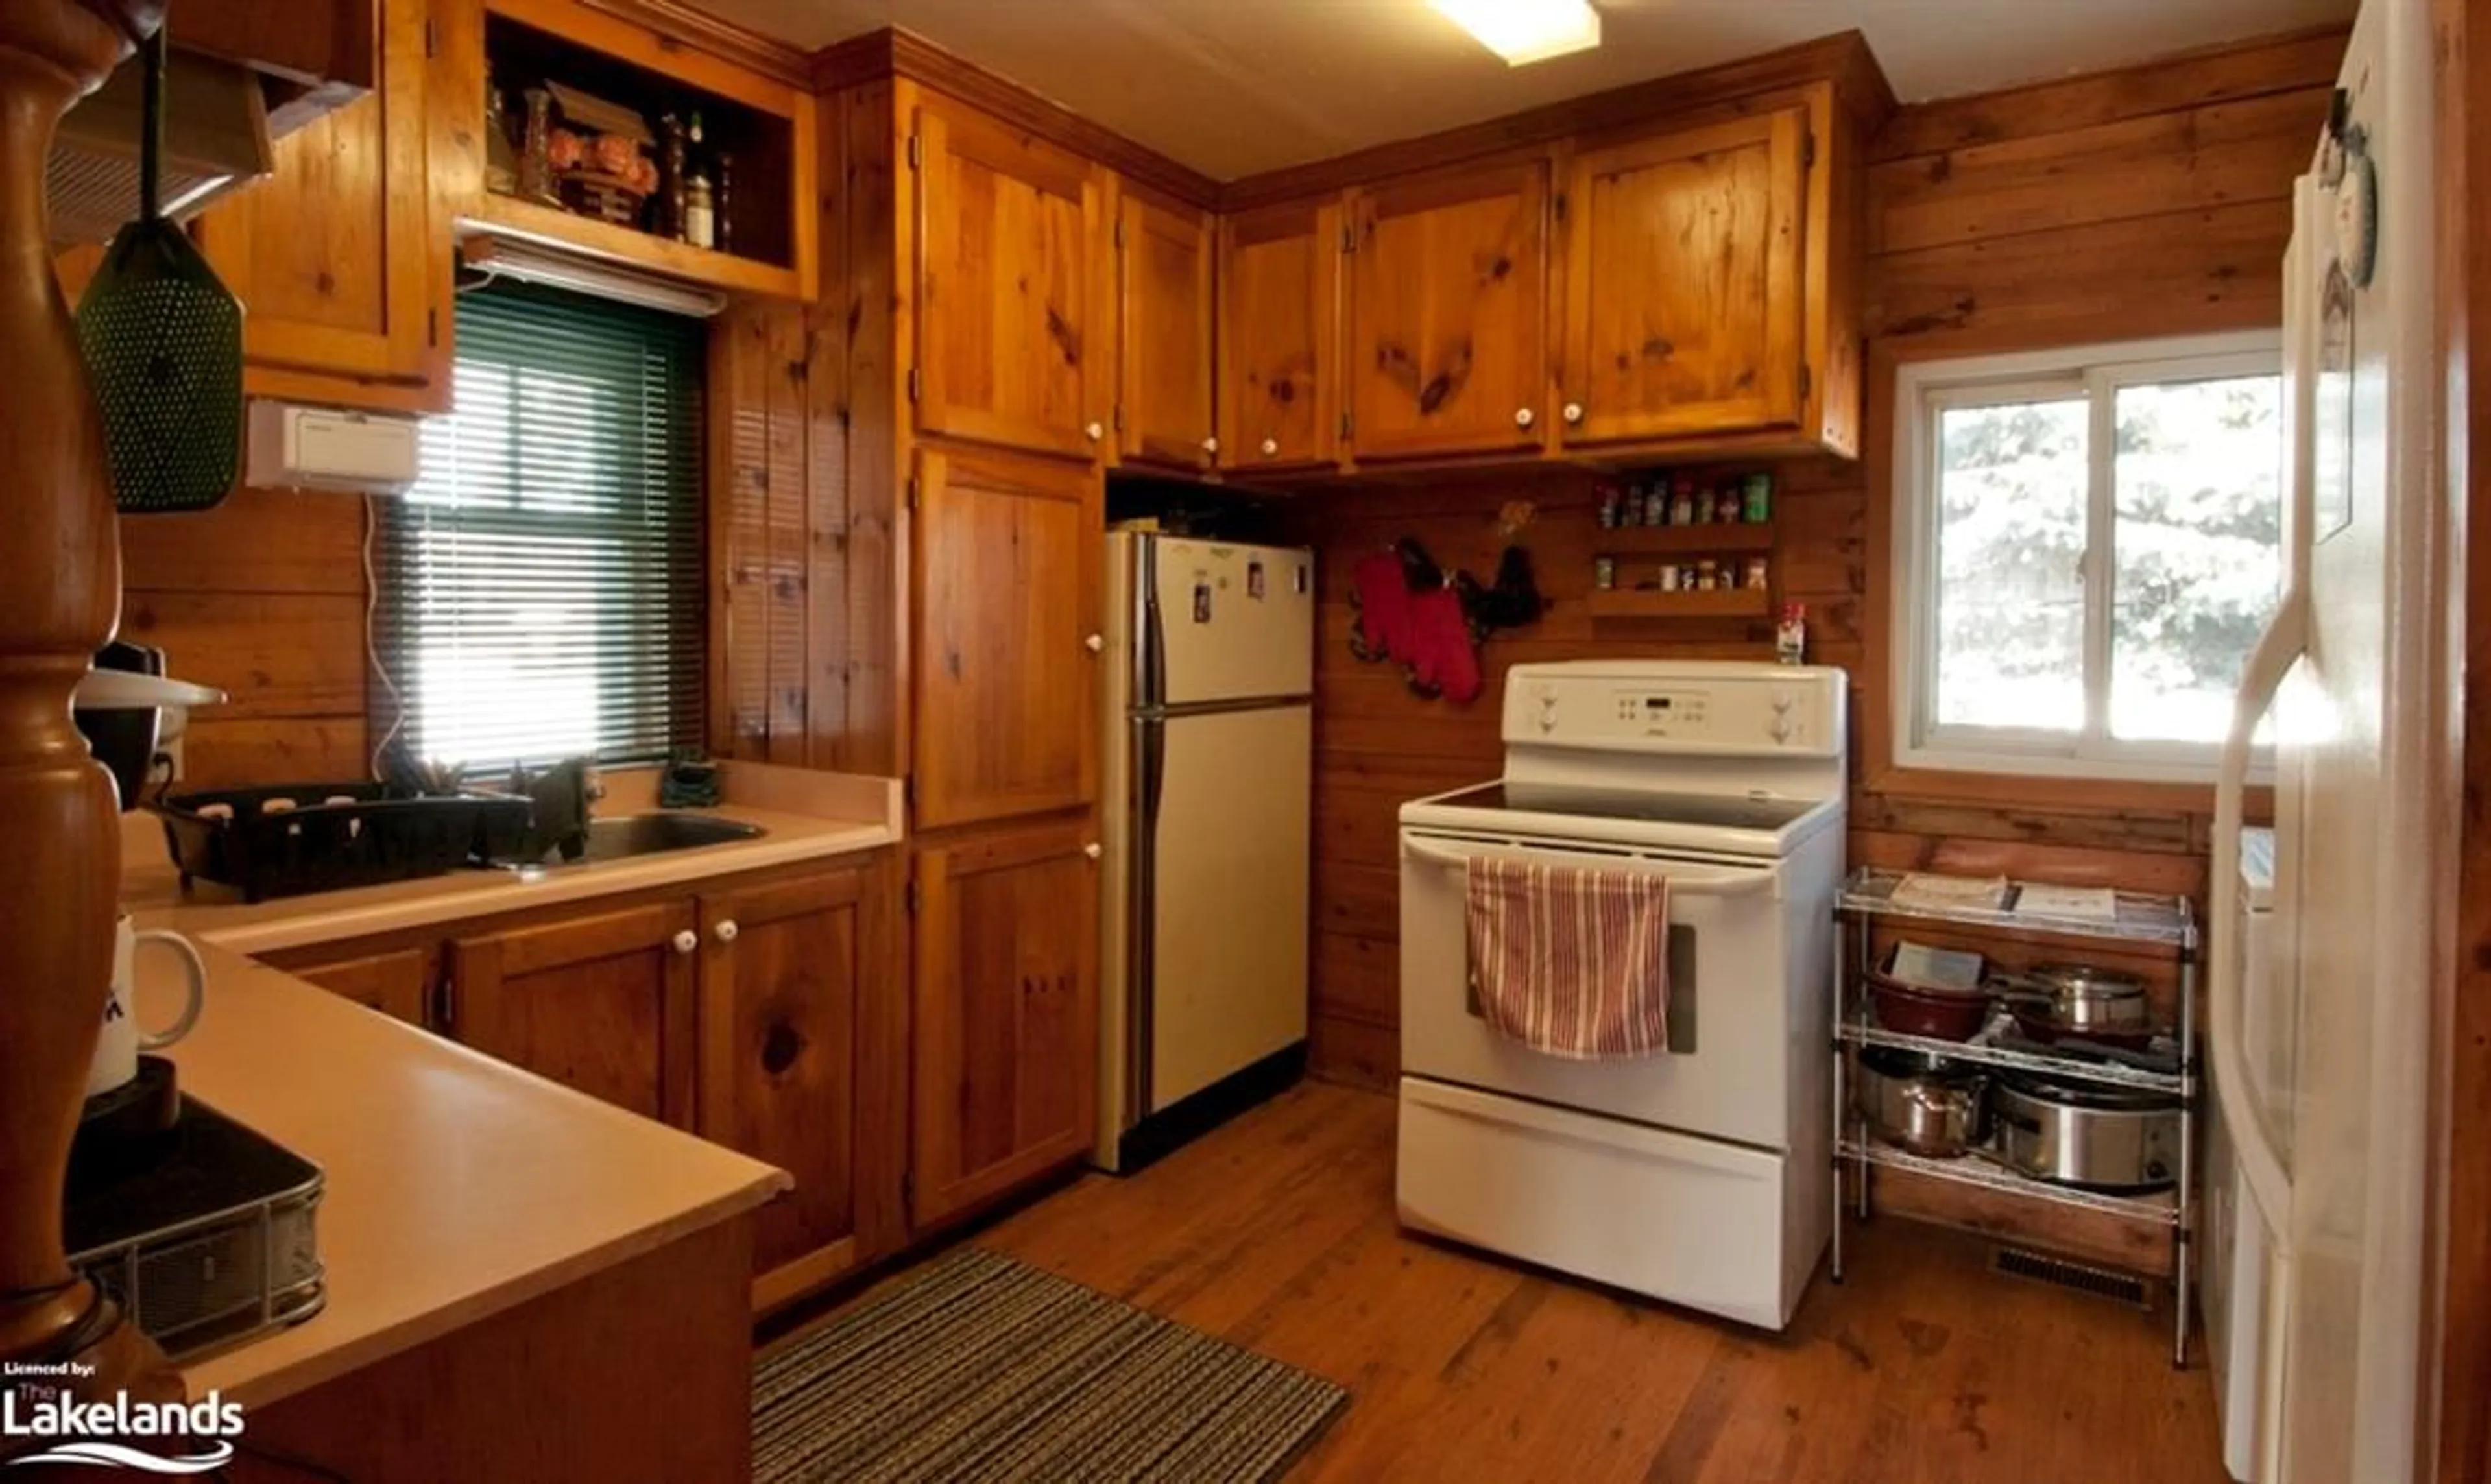 Standard kitchen for 4352 124 County Rd, Clearview Ontario L9Y 3Z1